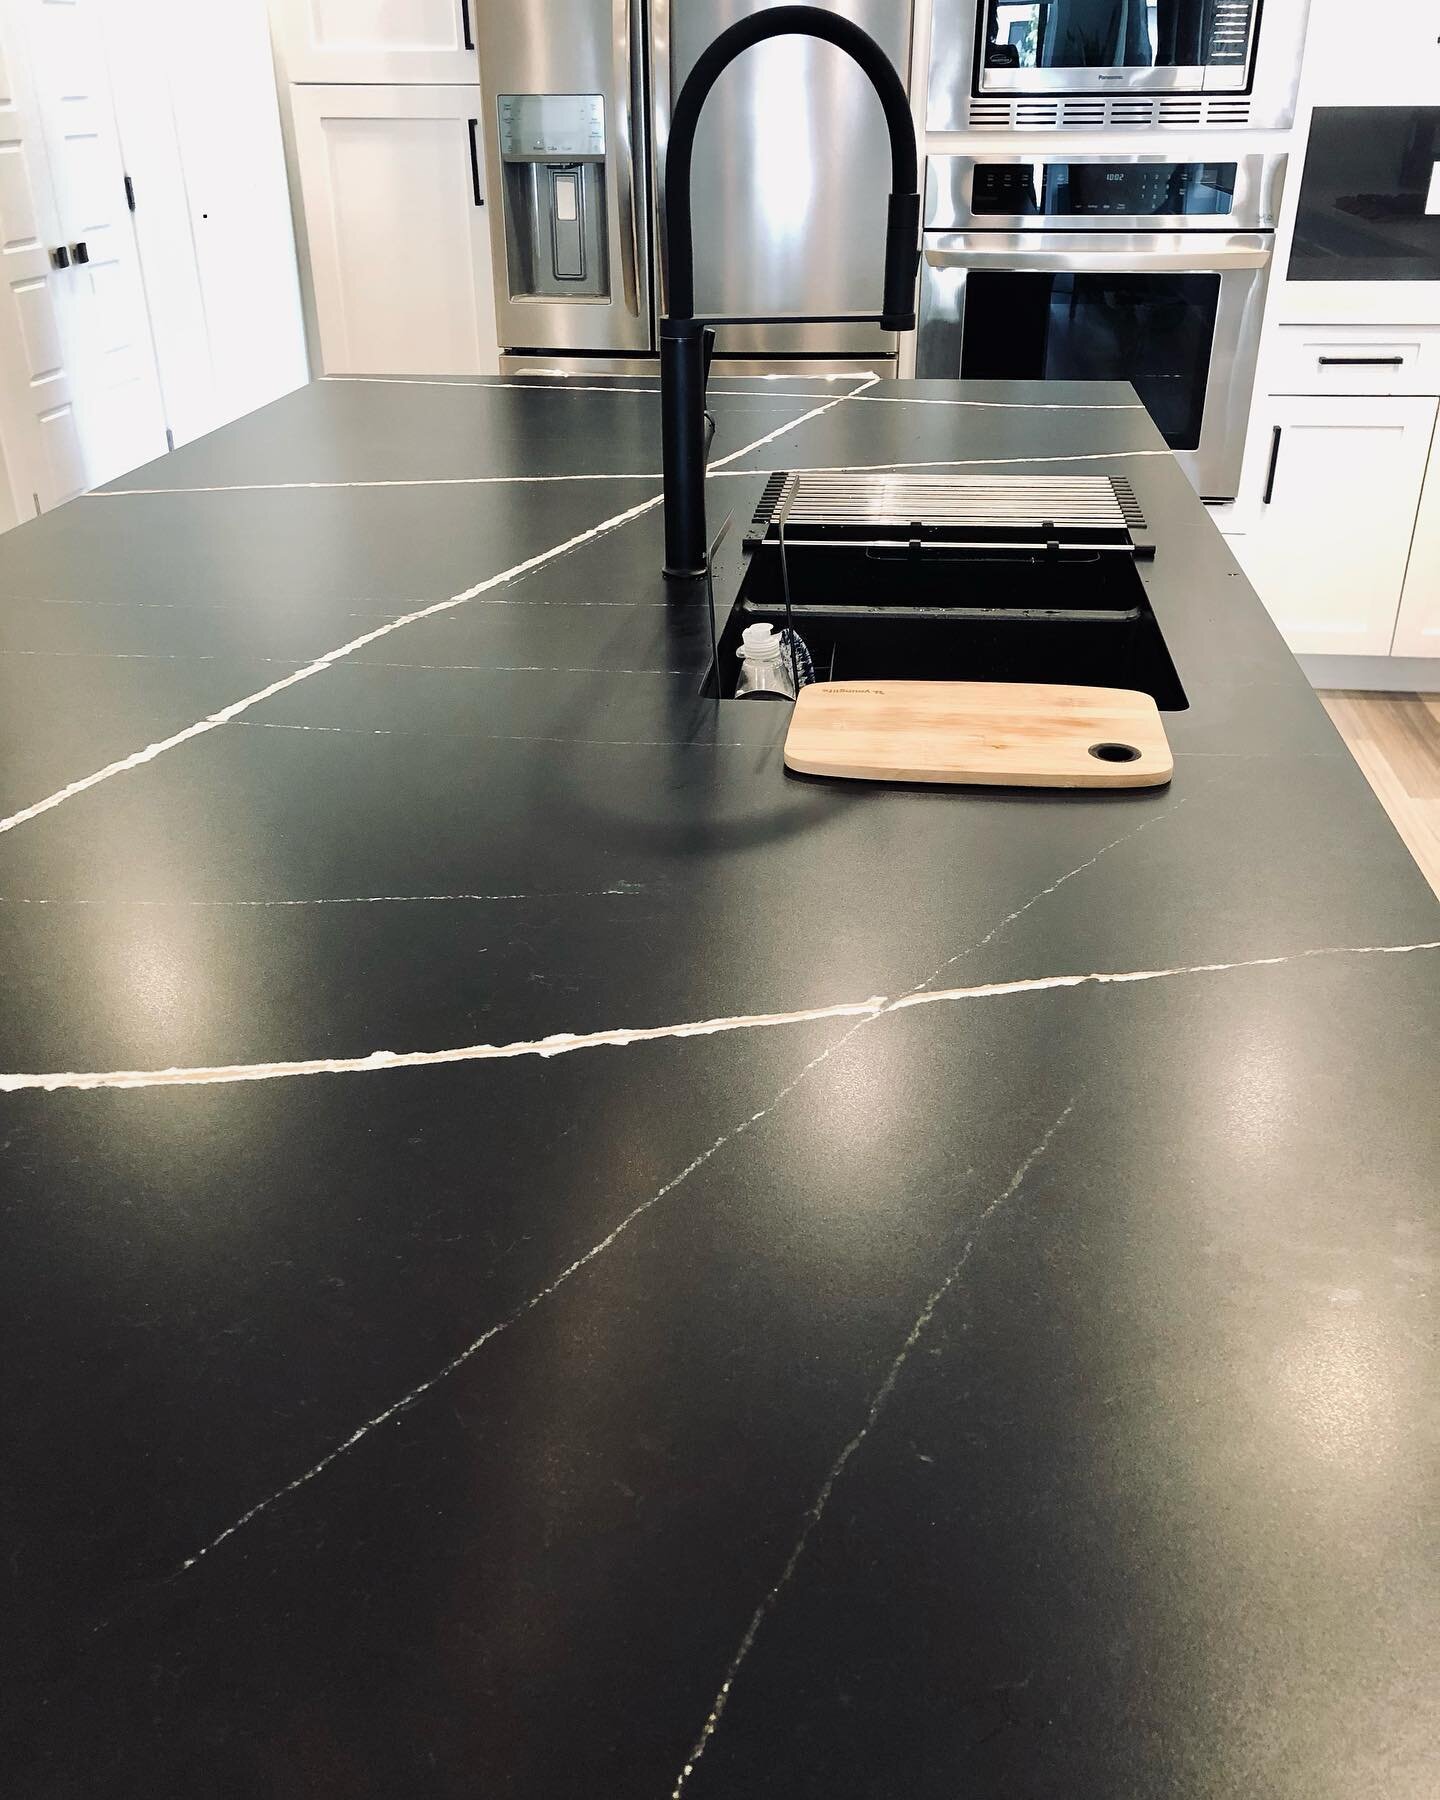 Moody, Matte and Black! A little drama, a soft texture. This is coming in more and more - texture and dark finishes. Get this look @cosentinocanada Silestone Noir Suede. 
.
.
.
.
.
#revitastone #revitastonecountertopskelowna #kelownabuild #kelownabui